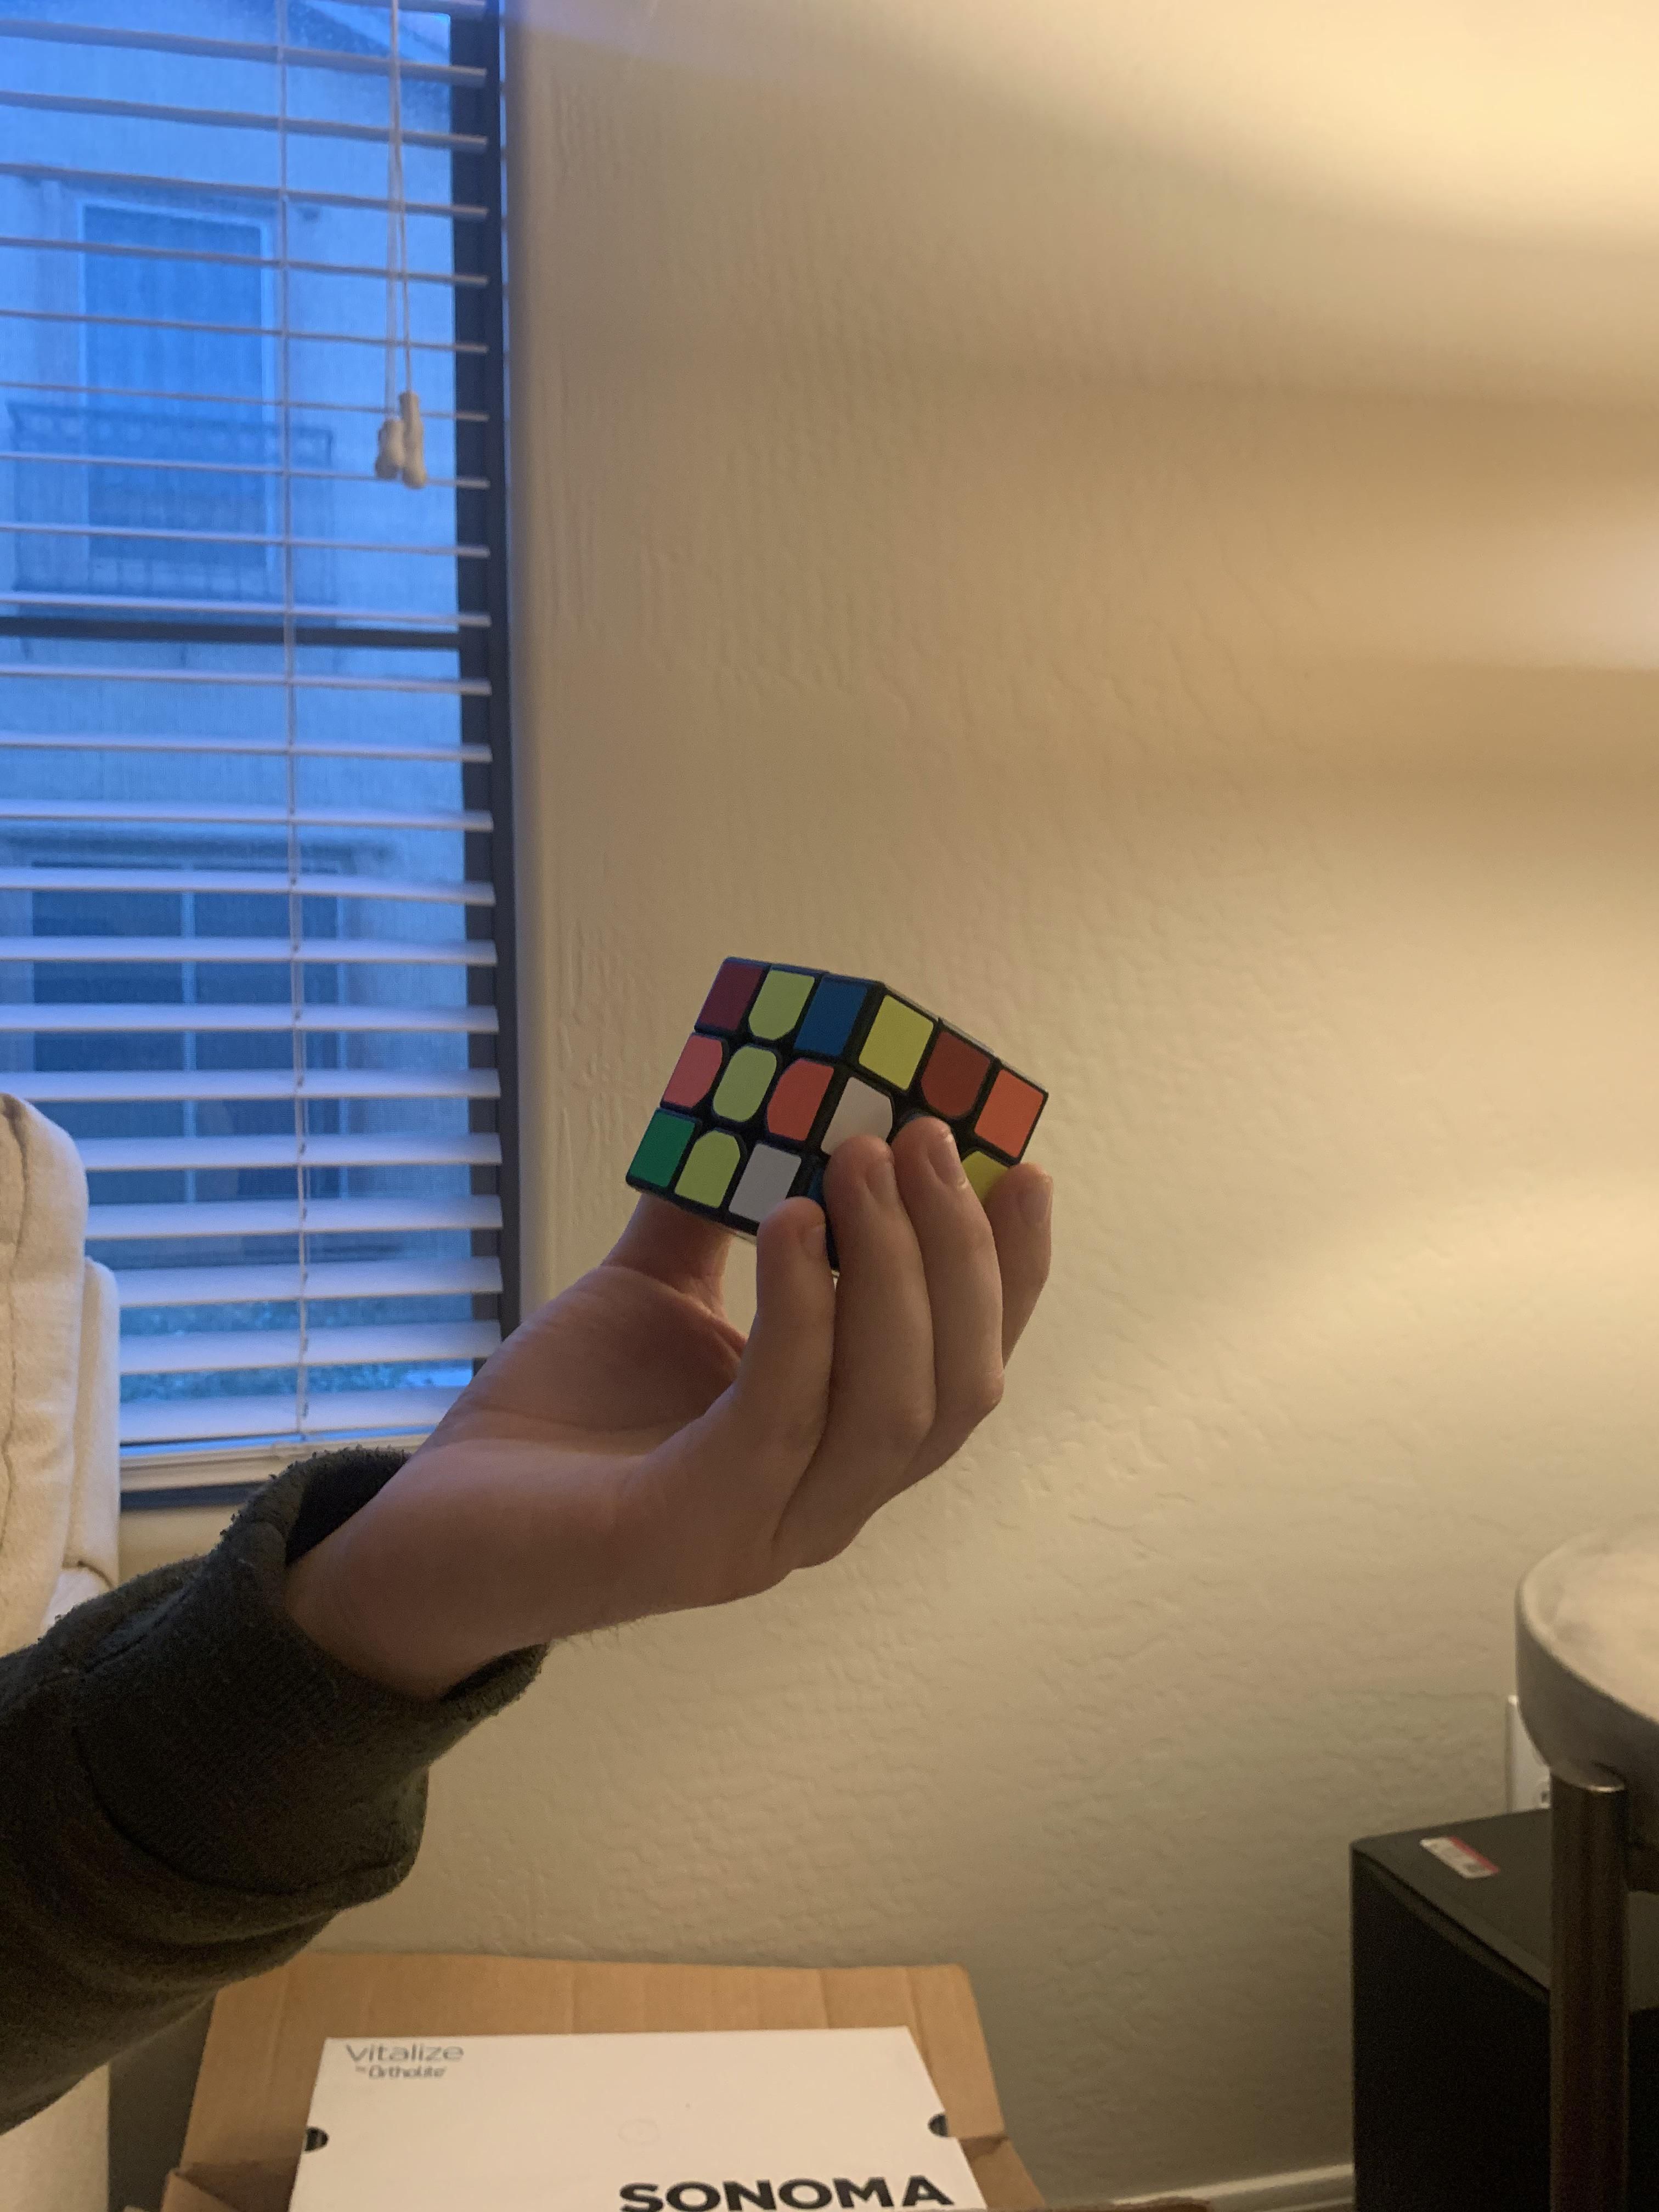 I’ve been color blind for 16 years but today I finally finished my first Rubik’s cube.